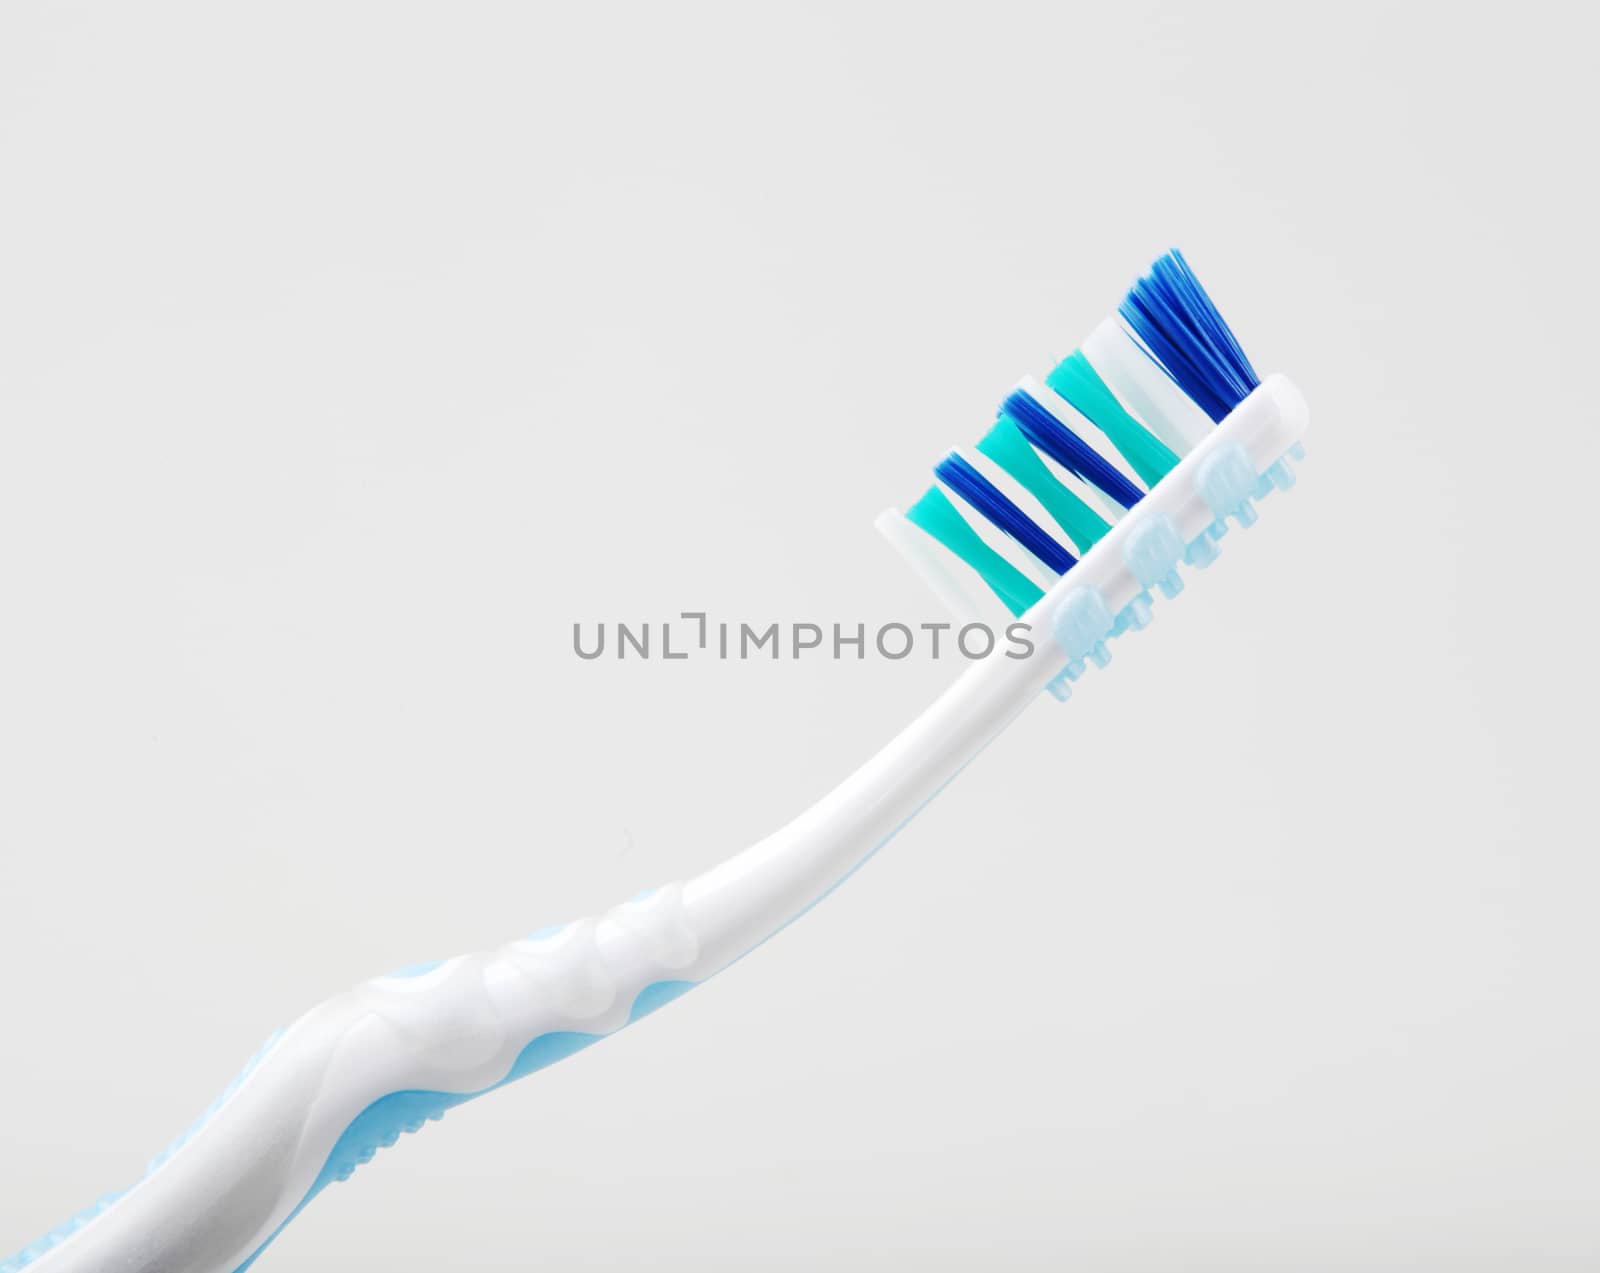 Plastic Toothbrush Against White Background by nenovbrothers